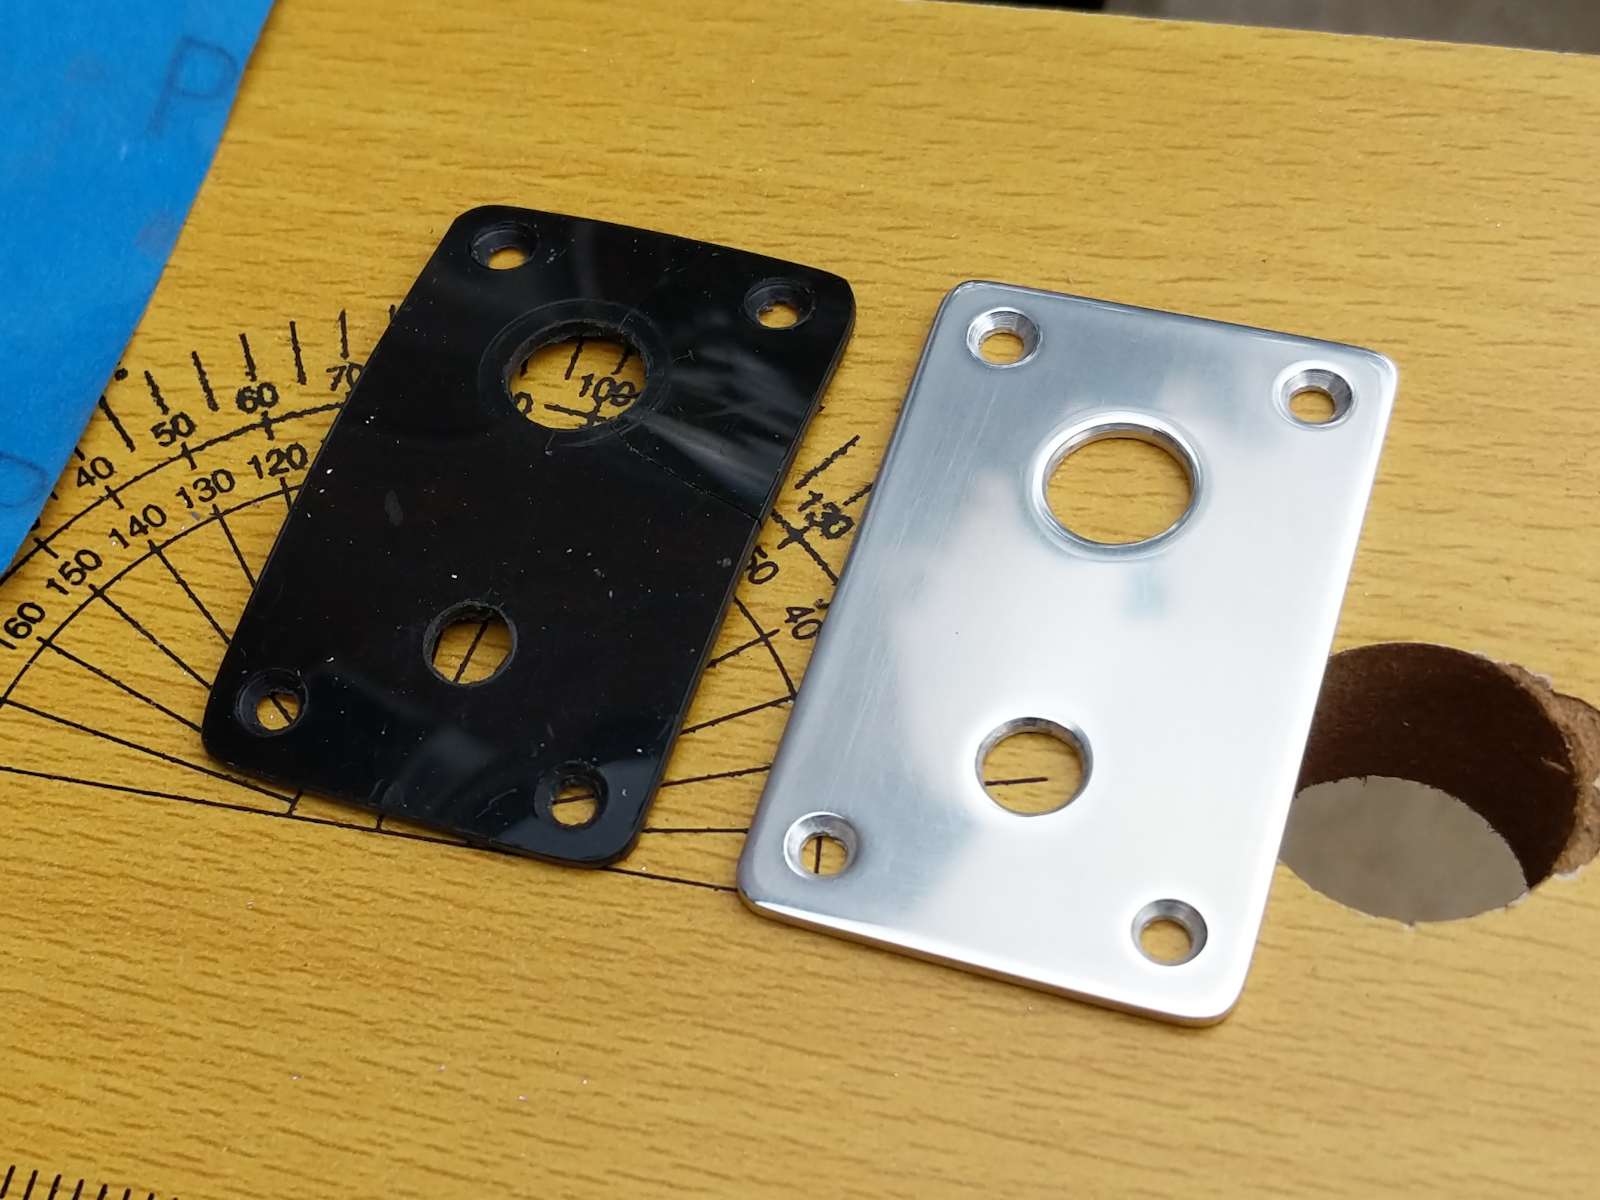 The original plastic jack plate and my home made aluminium replacement next to each other. The replacement looks more like an industrial product than the original one.